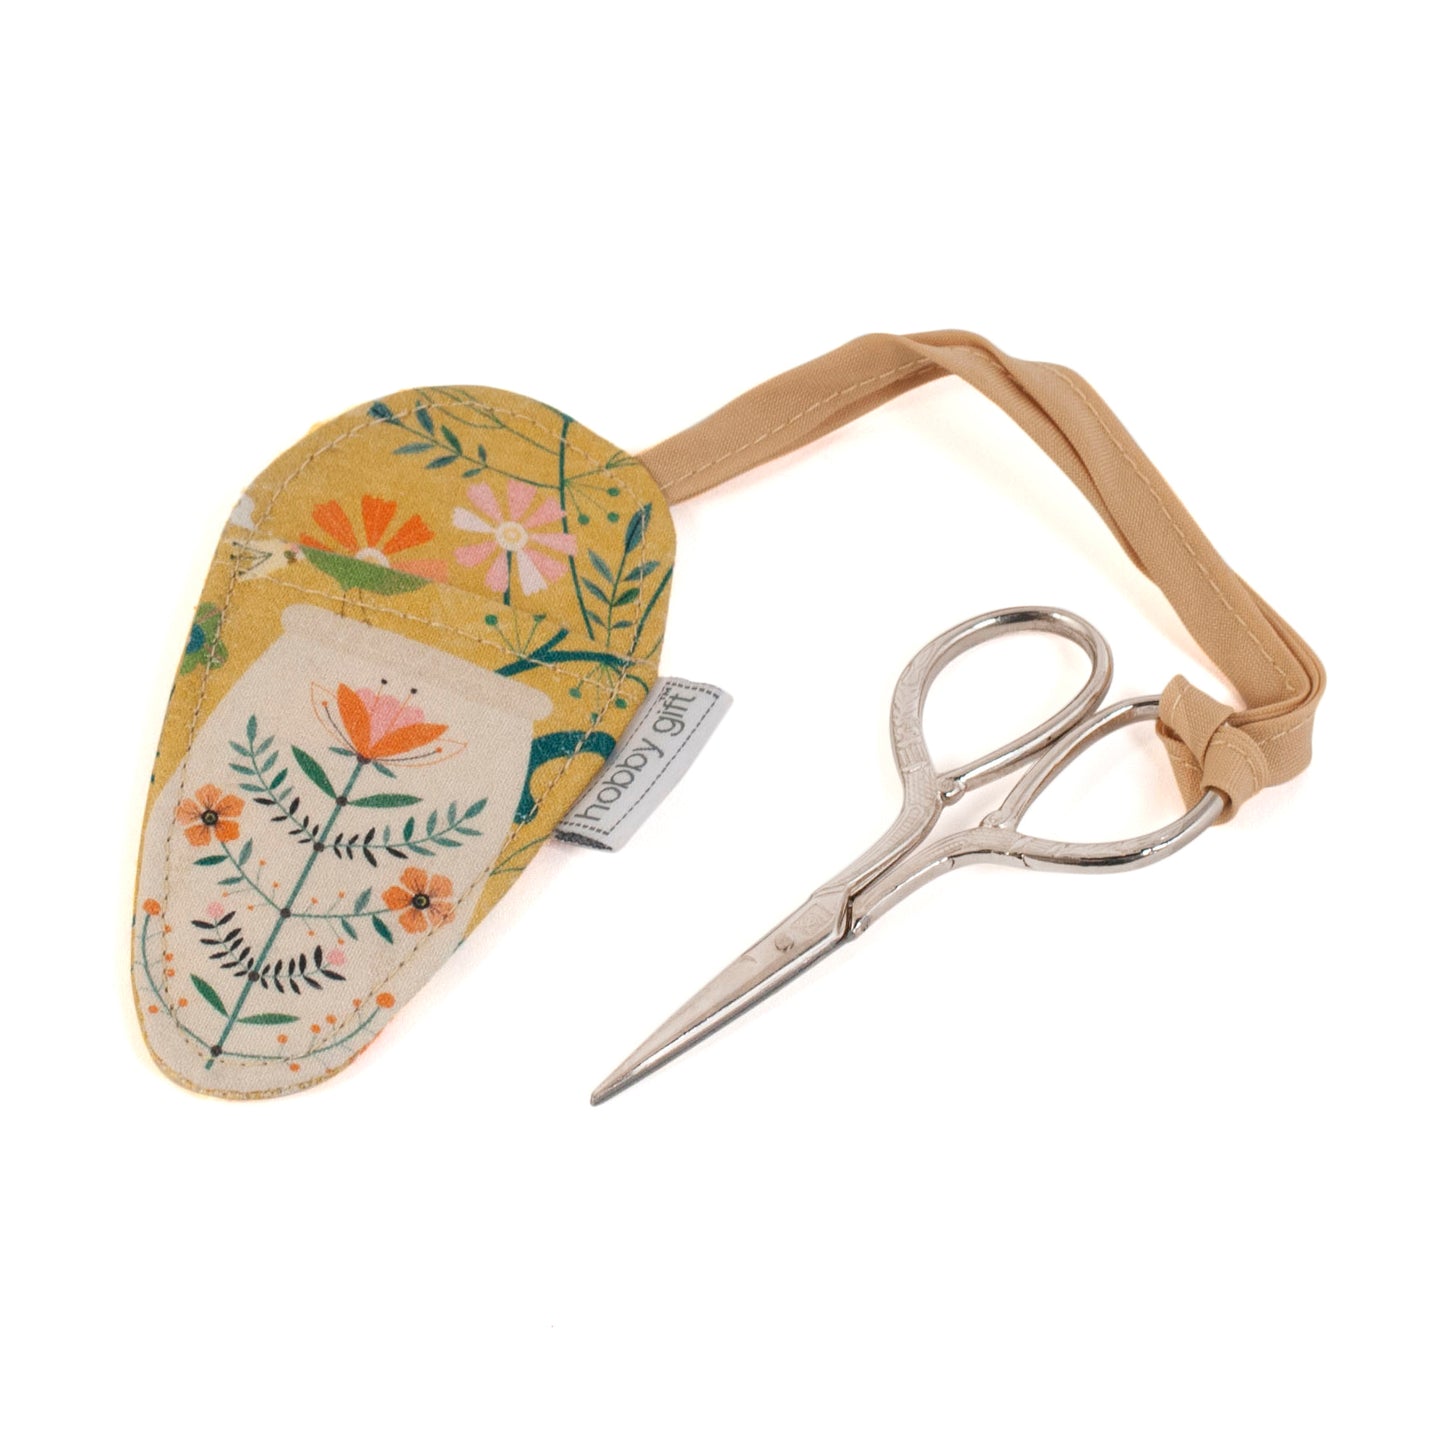 Embroidery Scissors with Case